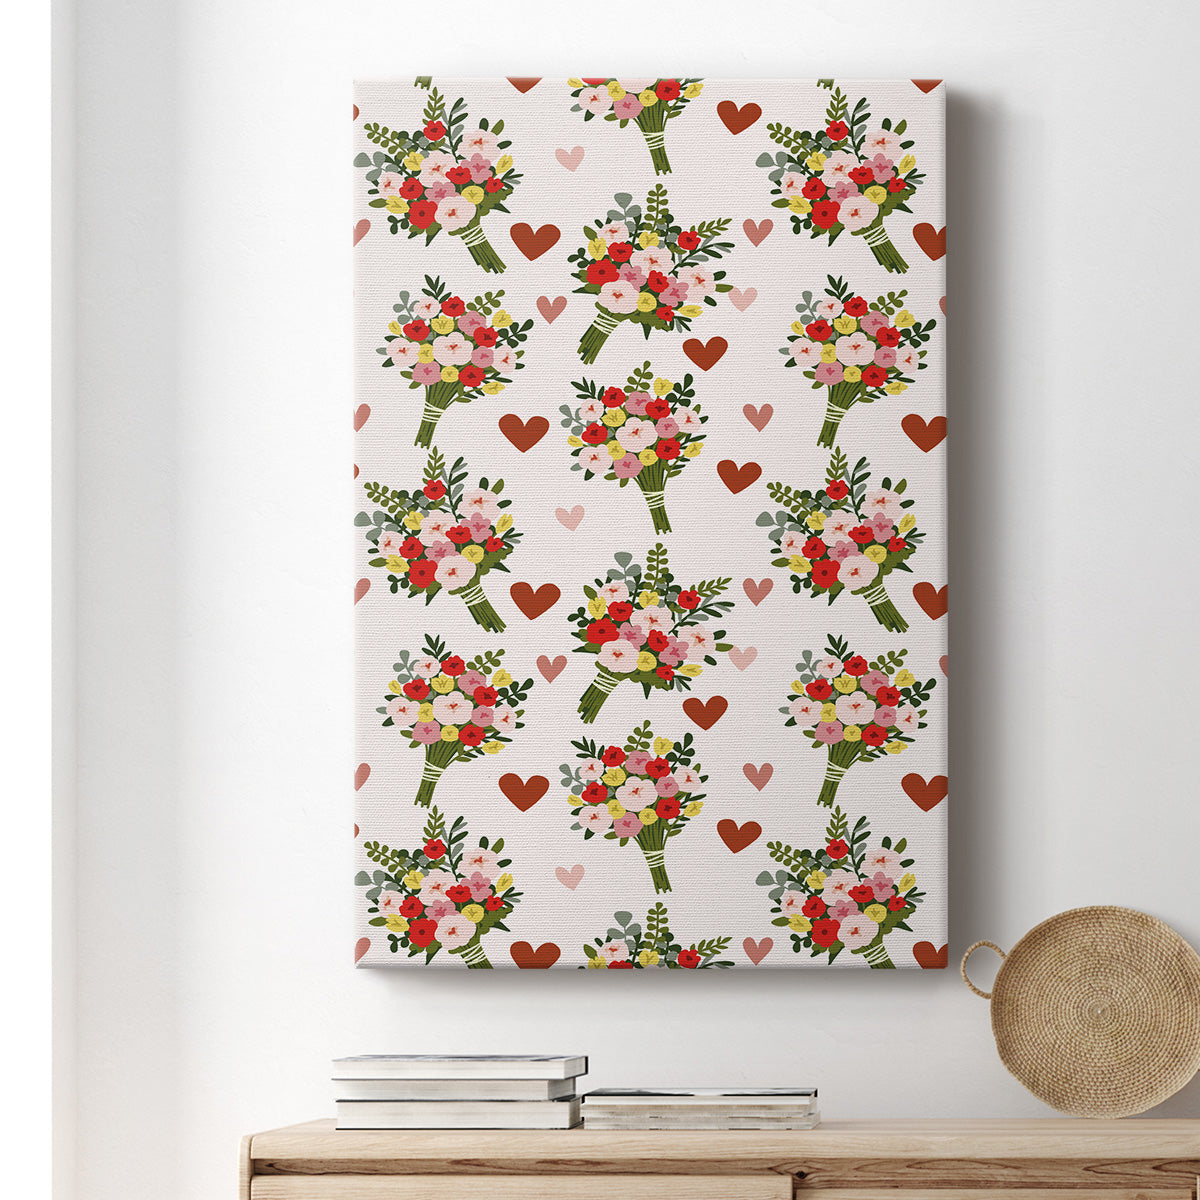 Darling Valentine Collection E Premium Gallery Wrapped Canvas - Ready to Hang